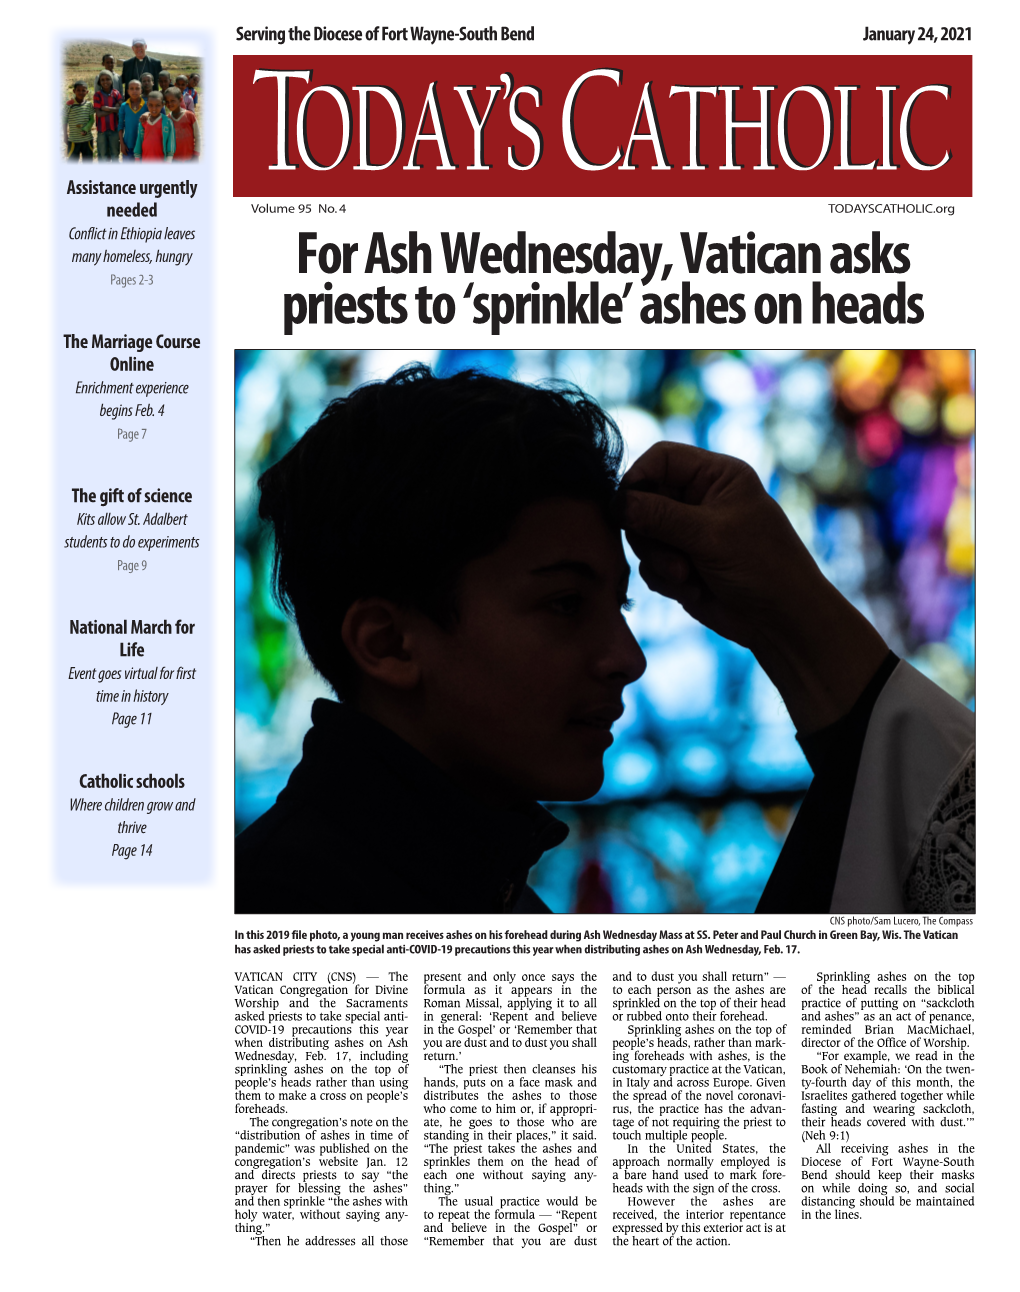 For Ash Wednesday, Vatican Asks Priests to 'Sprinkle' Ashes on Heads